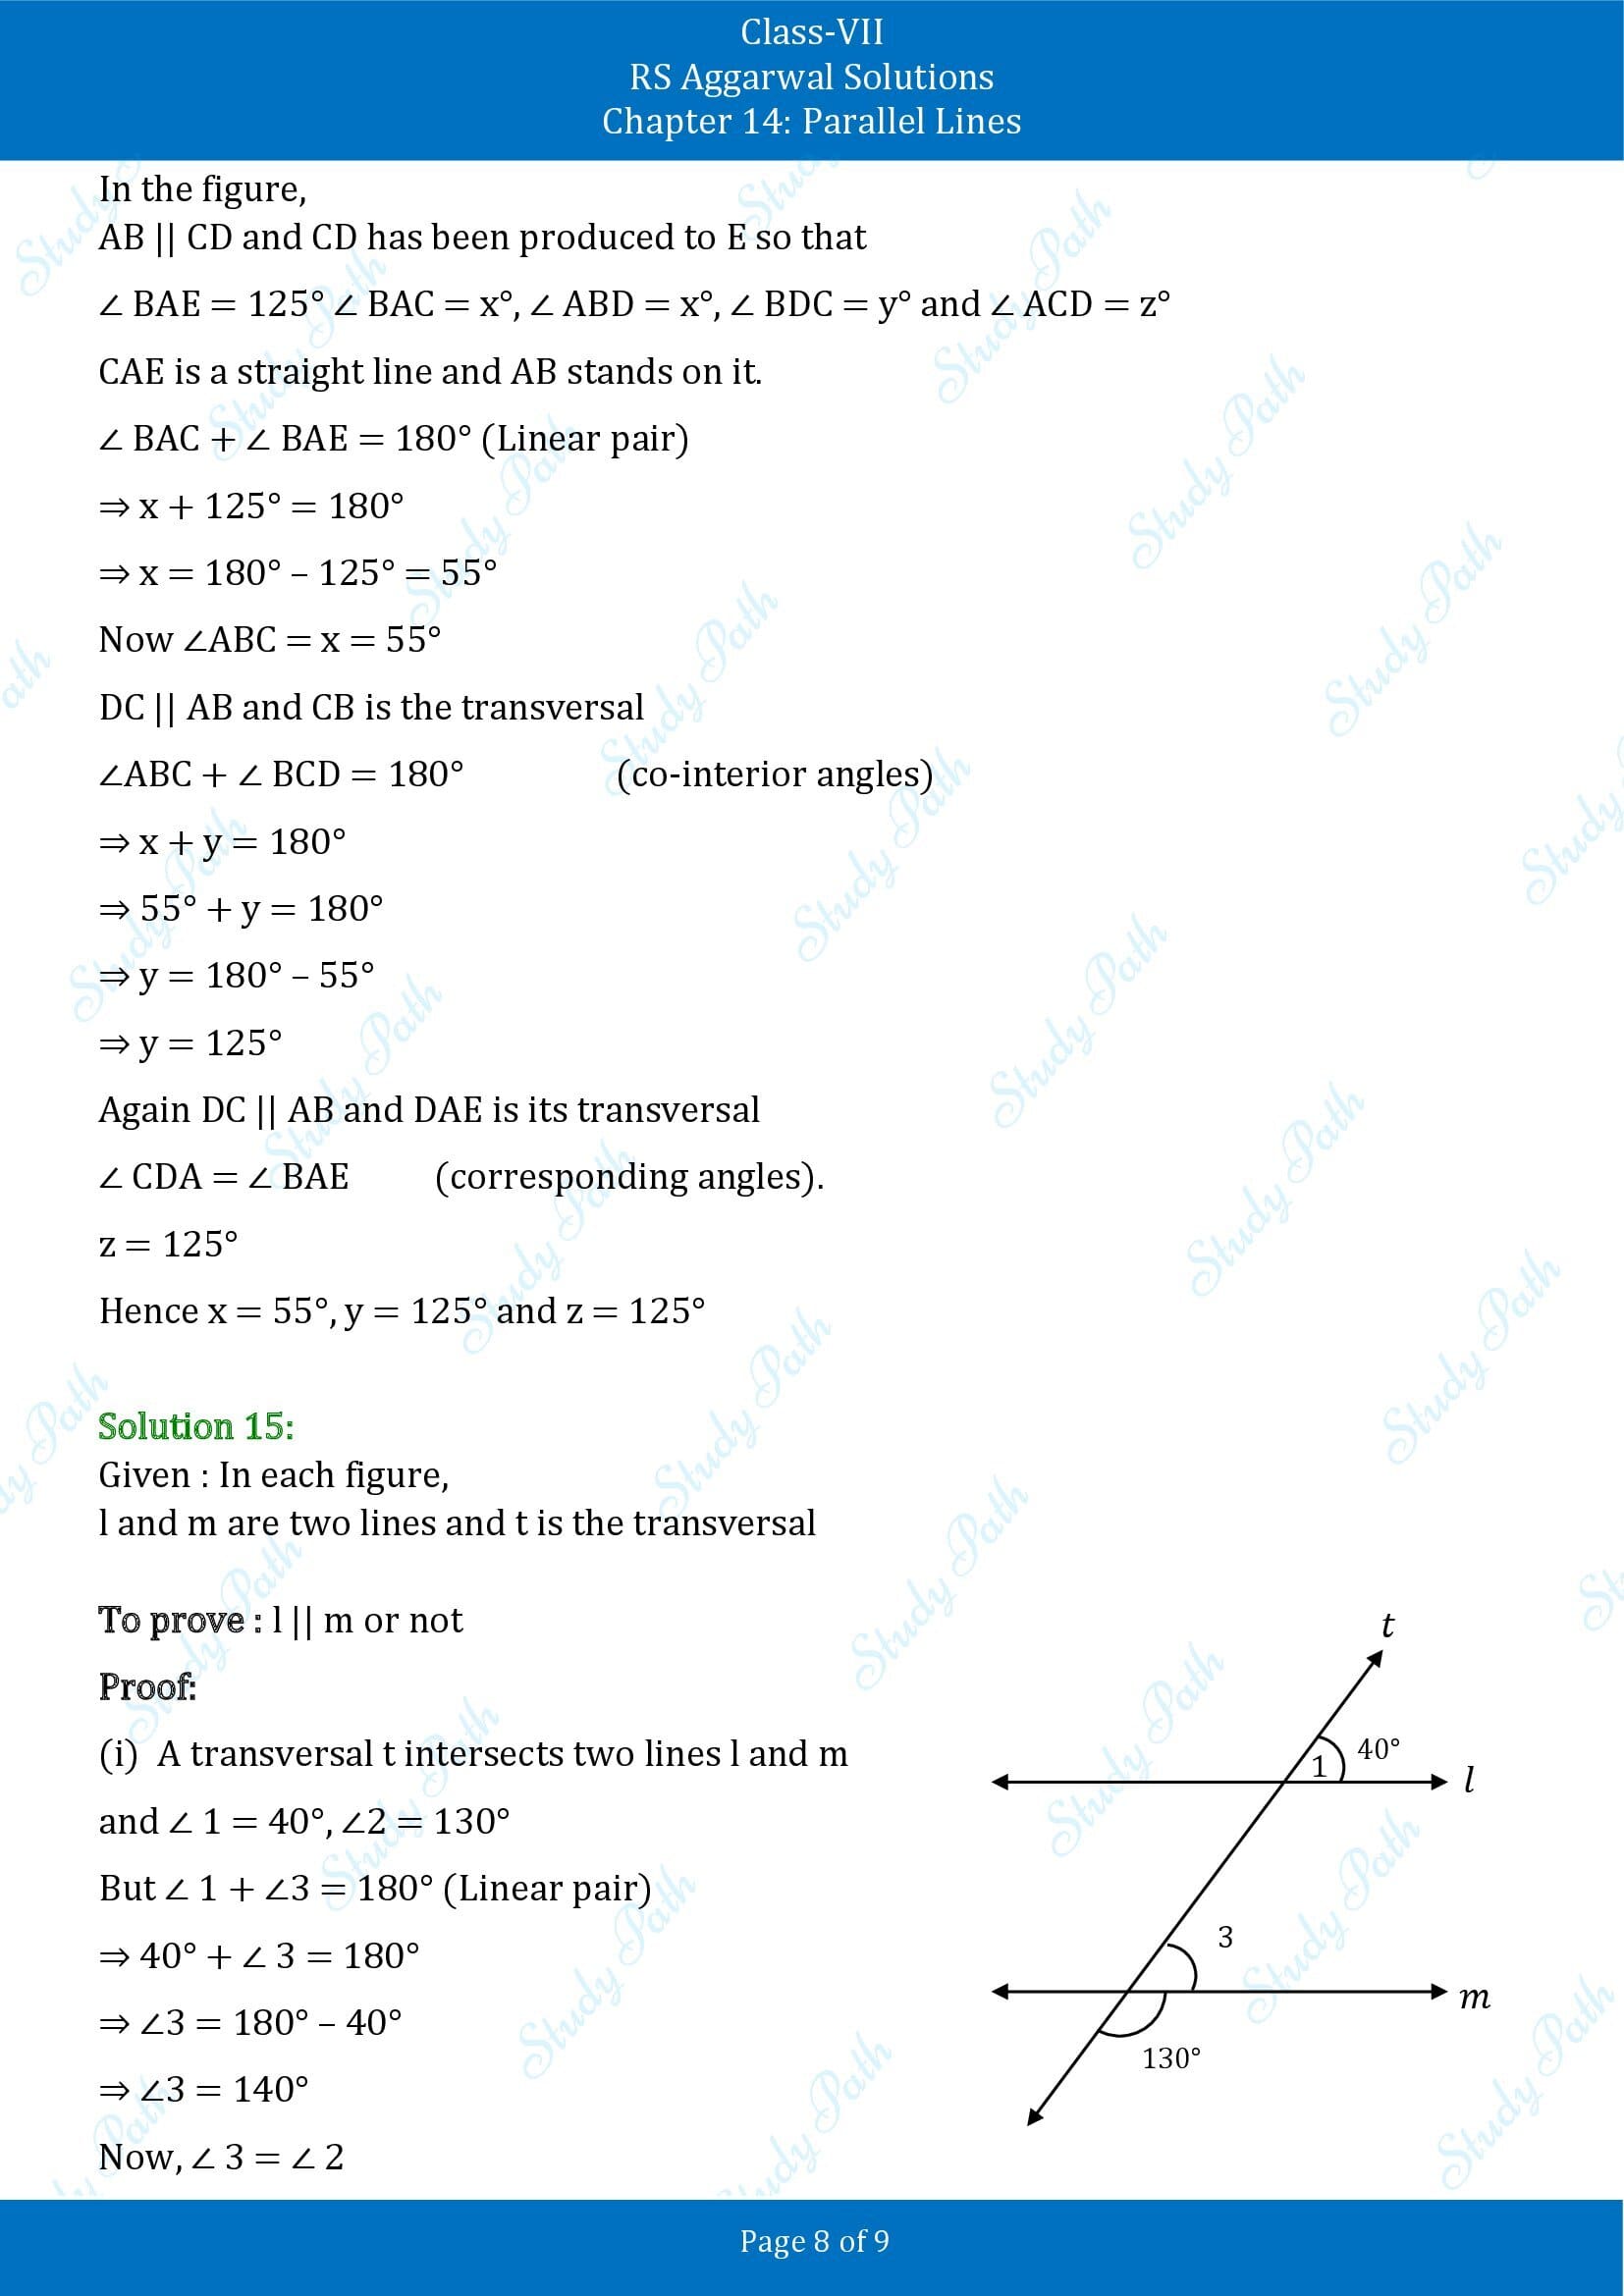 RS Aggarwal Solutions Class 7 Chapter 14 Parallel Lines 00008